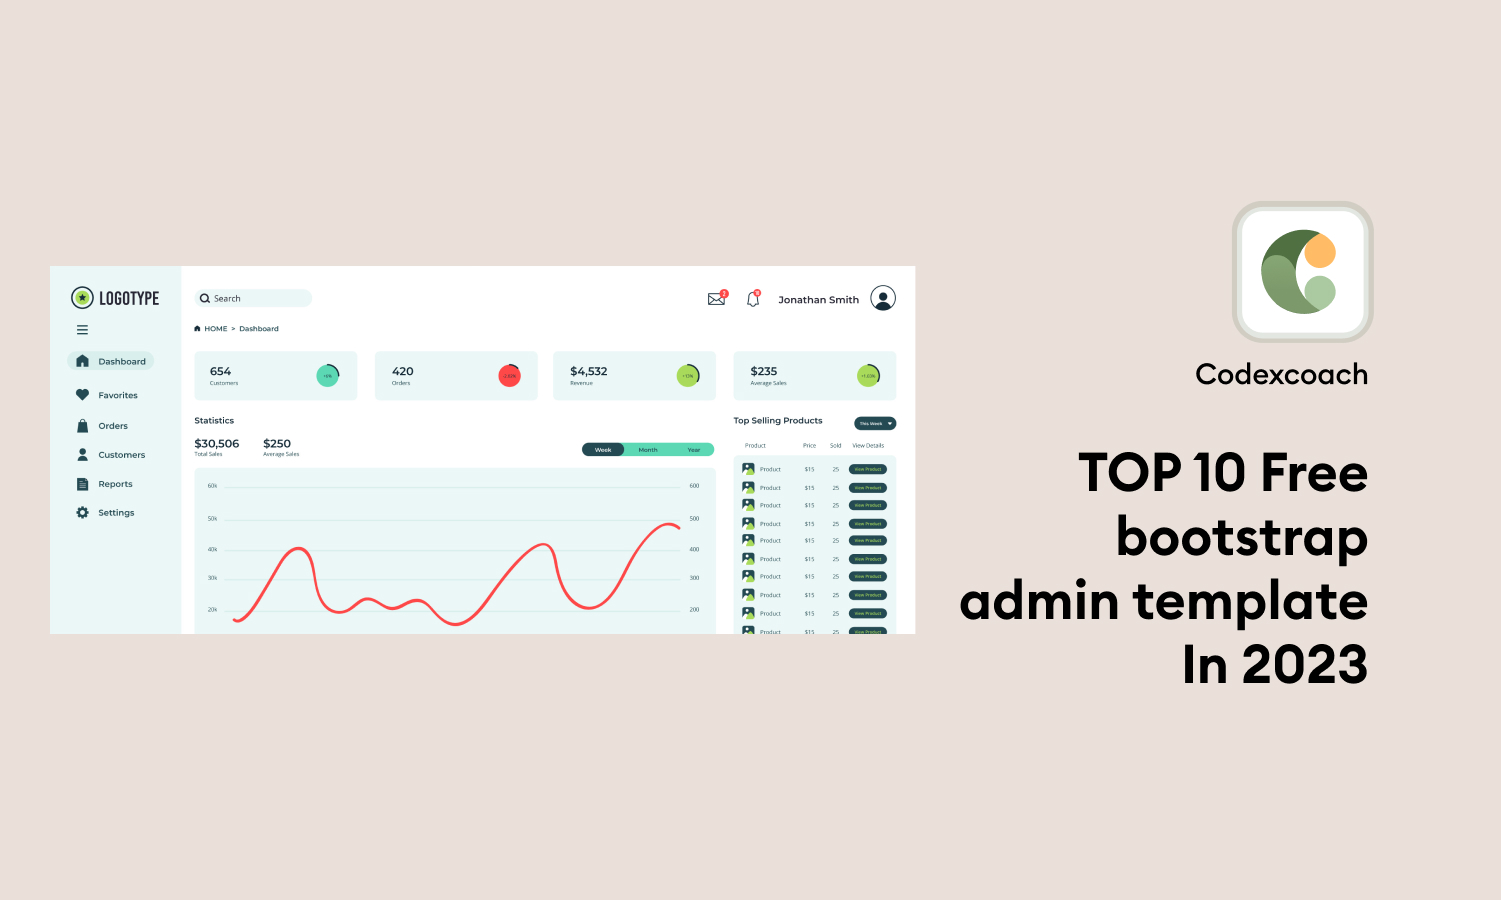 Top 10 Free Bootstrap Admin Template In 2023